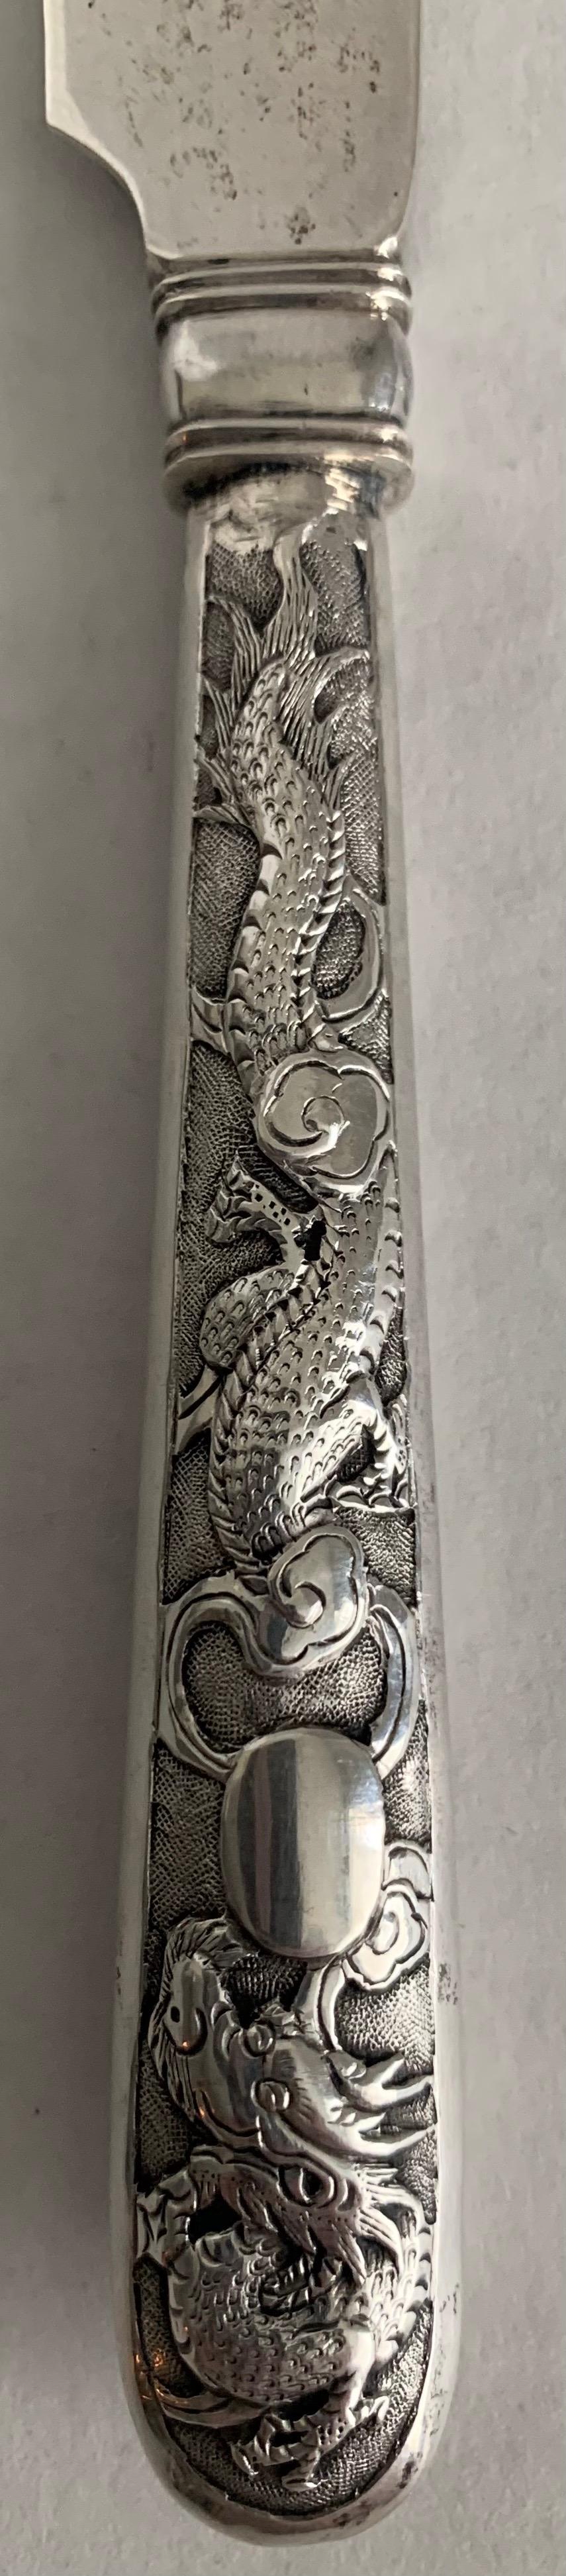 Chinese Export Silver Dragon Motif Knife or Letter Opener In Good Condition For Sale In Stamford, CT